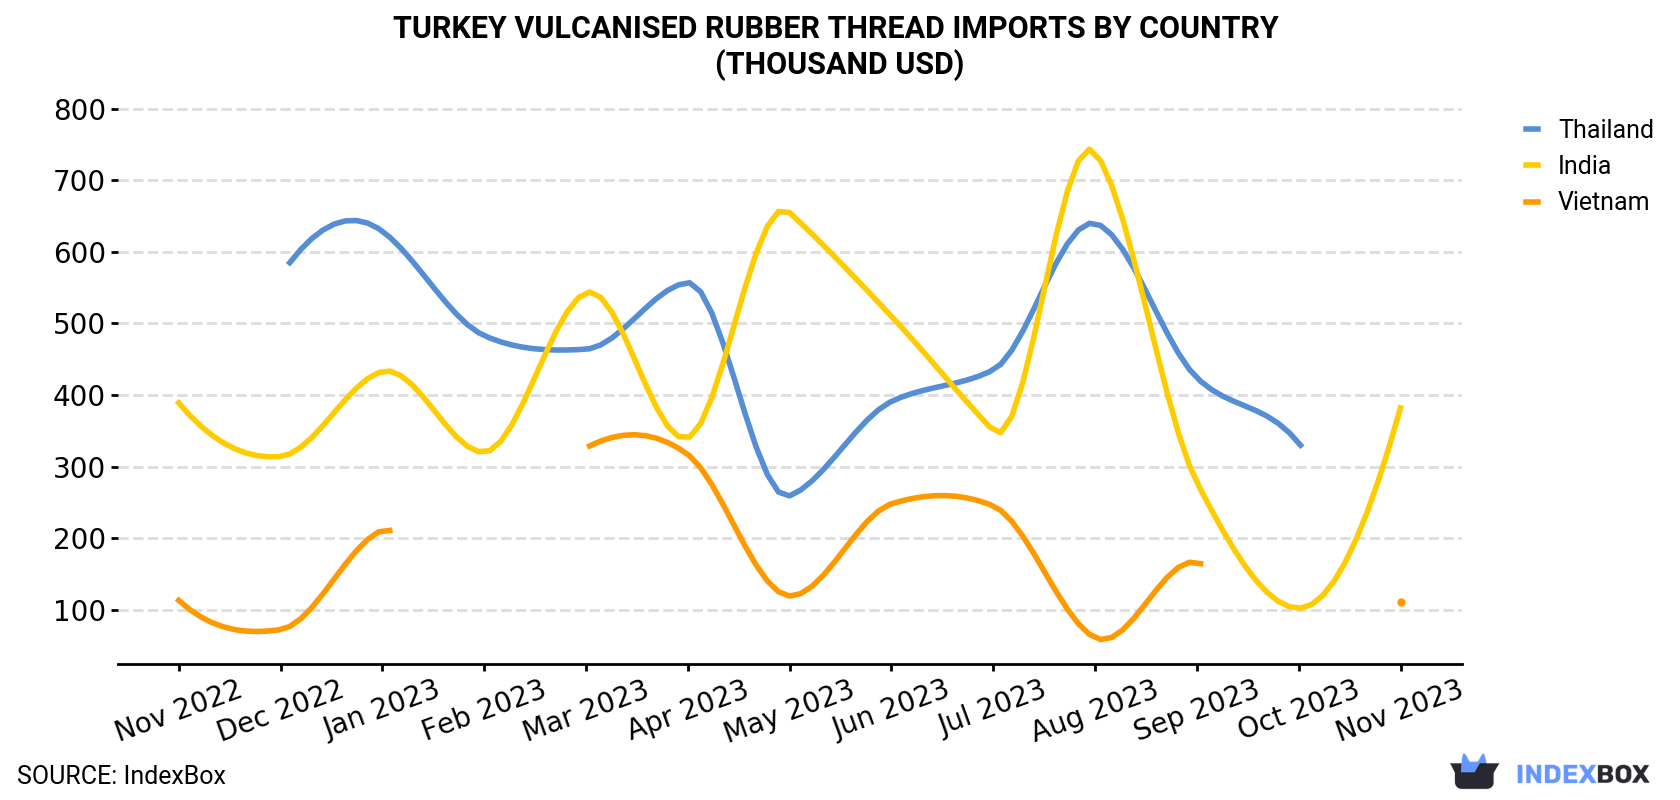 Turkey Vulcanised Rubber Thread Imports By Country (Thousand USD)